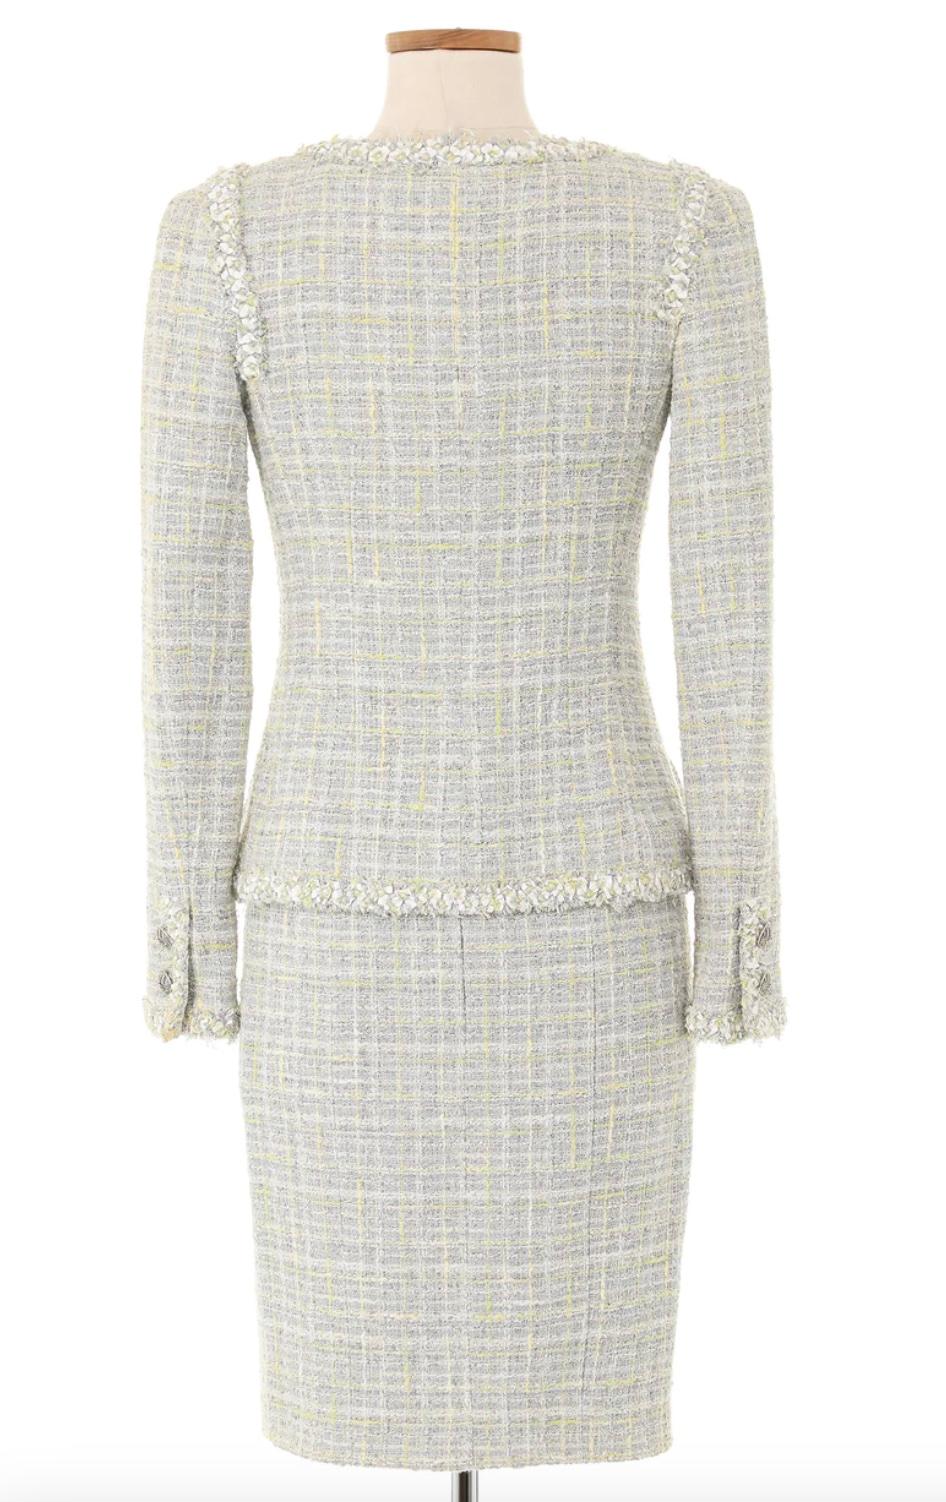 Chanel Spring 2009 Grey Tweed Skirt Suit. This suit is a classic Chanel piece with hints of green delicately woven throughout to add a beautiful touch of color. This is a perfect transitional piece for the warmer or cooler months. Excellent Vintage